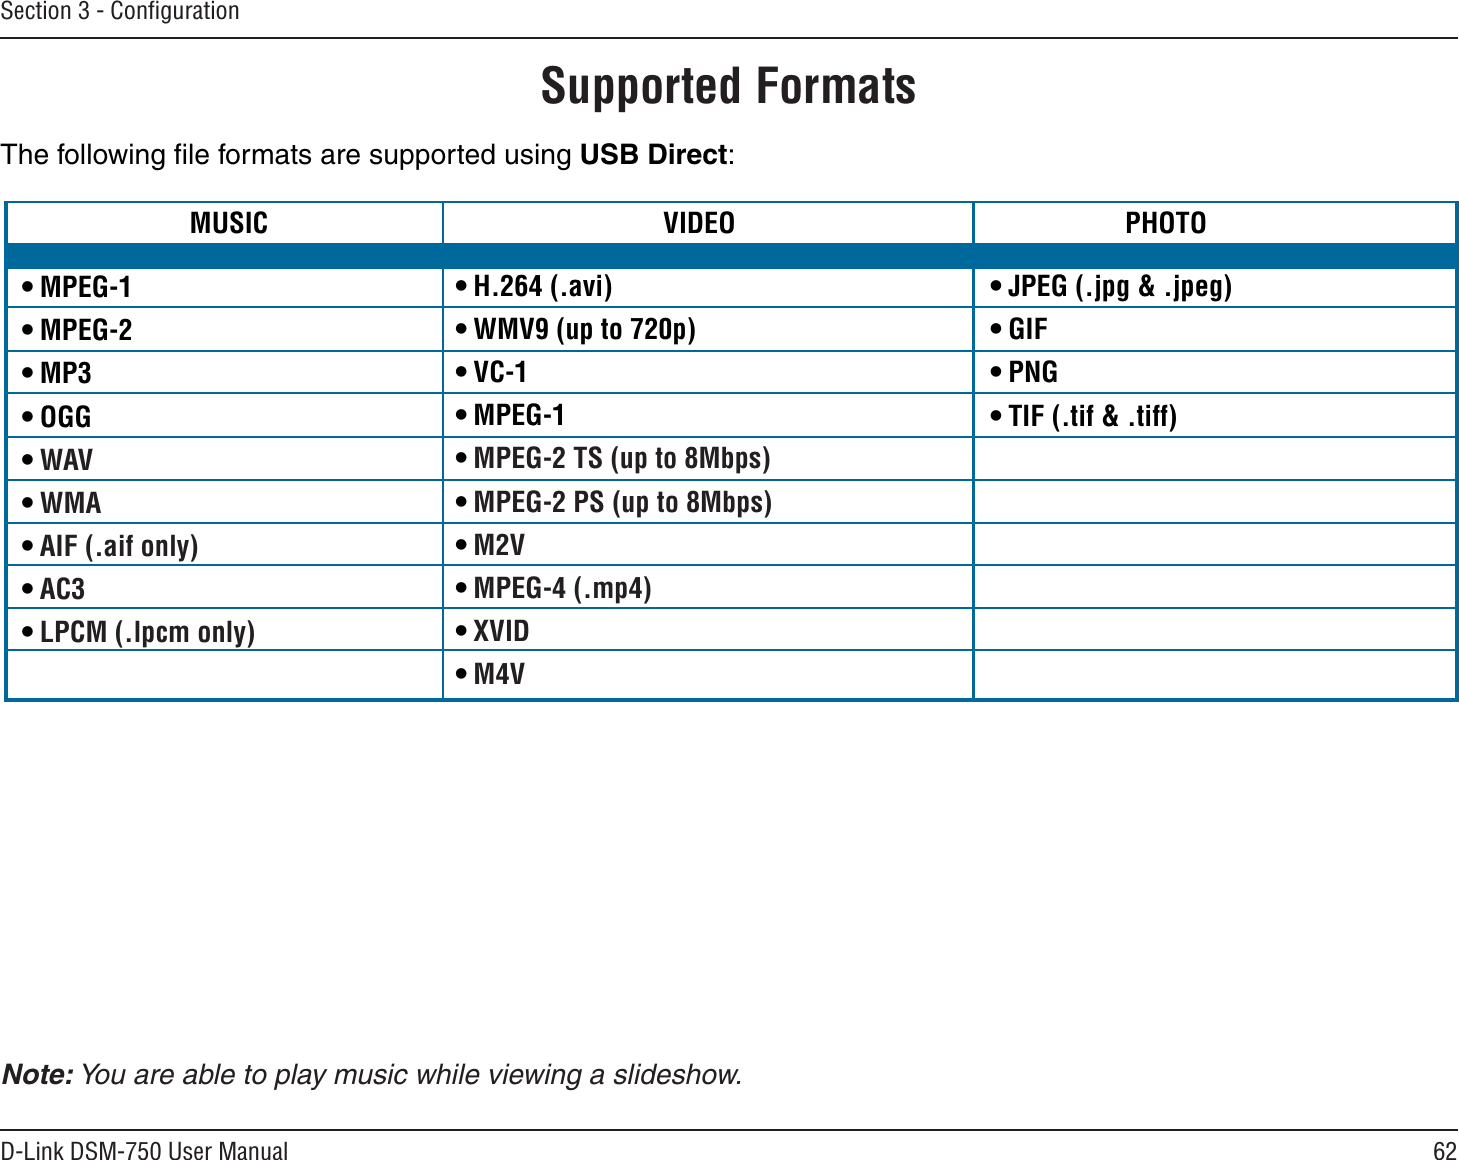 62D-Link DSM-750 User ManualSection 3 - ConﬁgurationSupported FormatsThe following ﬁle formats are supported using USB Direct: • MPEG-1• MPEG-2• MP3• OGG•WAV•WMA•AIF (.aif only)•AC3•LPCM (.lpcm only)• H.264 (.avi)• WMV9 (up to 720p)• VC-1• MPEG-1•MPEG-2 TS (up to 8Mbps)•MPEG-2 PS (up to 8Mbps)•M2V•MPEG-4 (.mp4)•XVID•M4V• JPEG (.jpg &amp; .jpeg)• GIF• PNG• TIF (.tif &amp; .tiff)Note: You are able to play music while viewing a slideshow.MUSIC      VIDEO    PHOTO